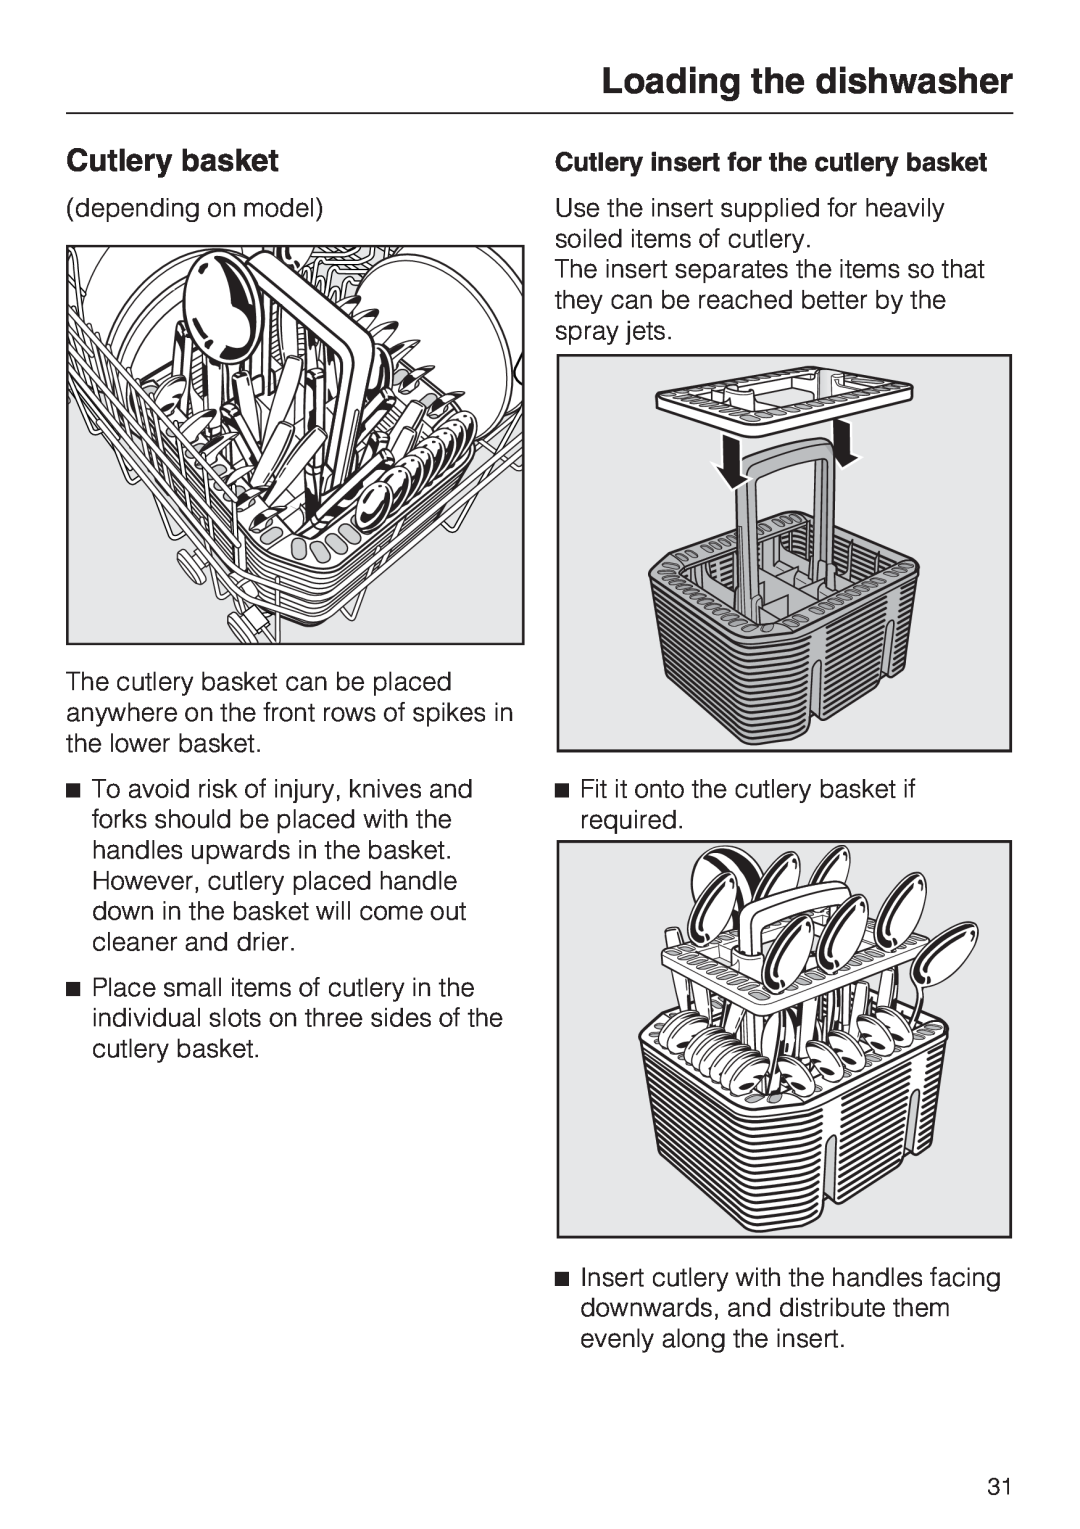 Miele G 5220, G 5225 operating instructions Cutlery basket, Loading the dishwasher, Cutlery insert for the cutlery basket 